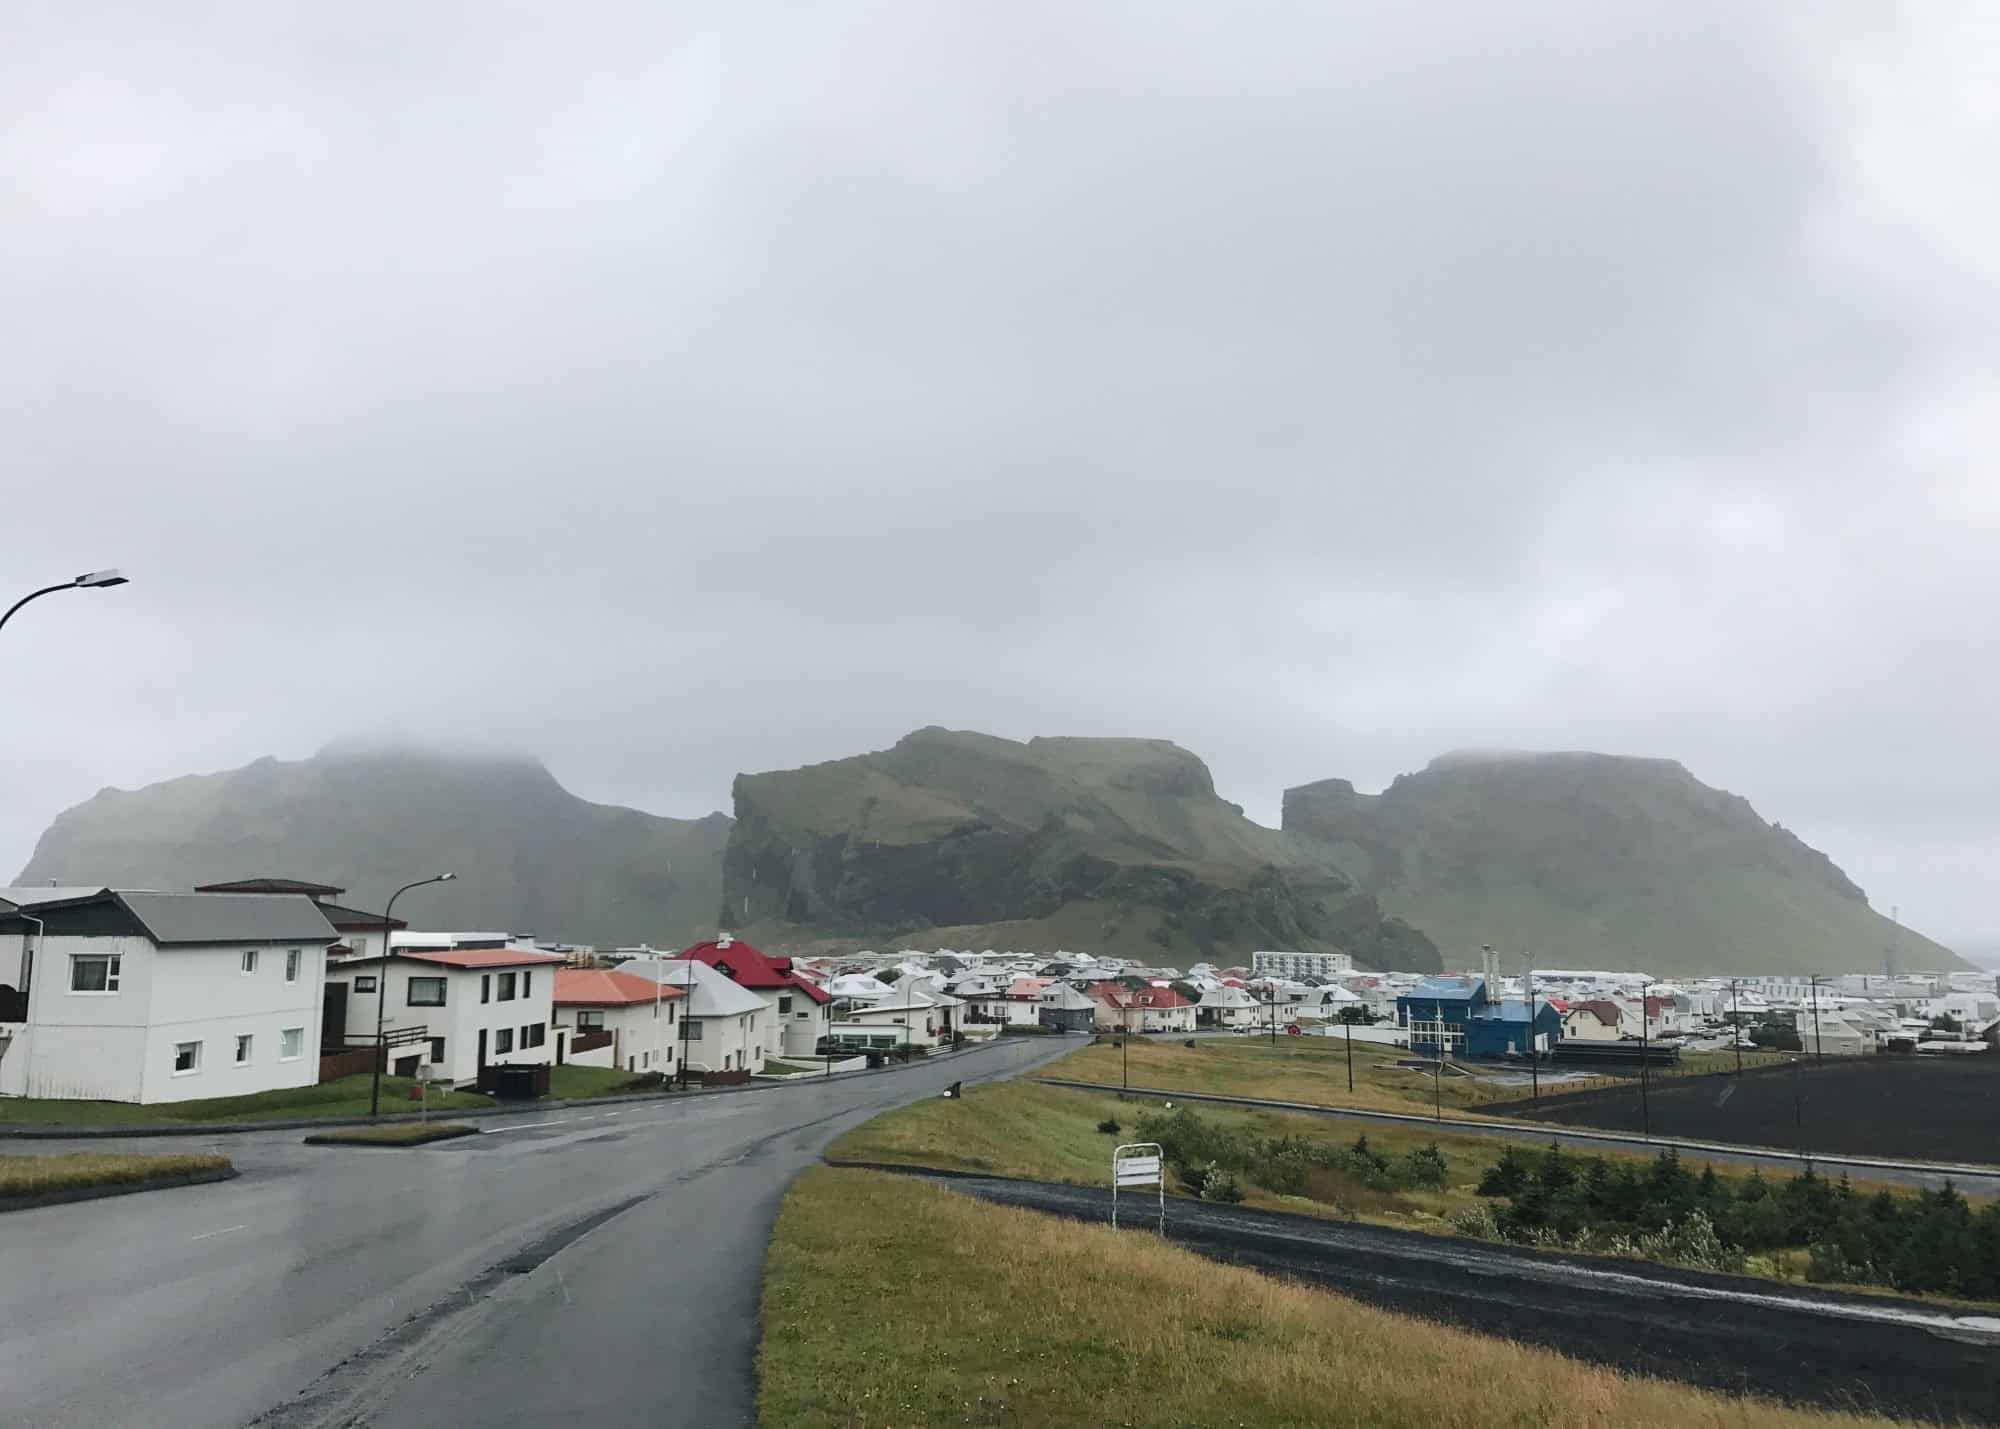 Iceland travel diary | perfect Iceland 7 day road trip itinerary | best 1 week Iceland Ring Road guide | how to do Iceland in one week | Blue Lagoon, Reykjavik, Golden Circle Tour, Westman Islands, Vik, Jokulsarlon | top tips on visiting Iceland | Diary of a Toronto Girl, a Canadian lifestyle blog